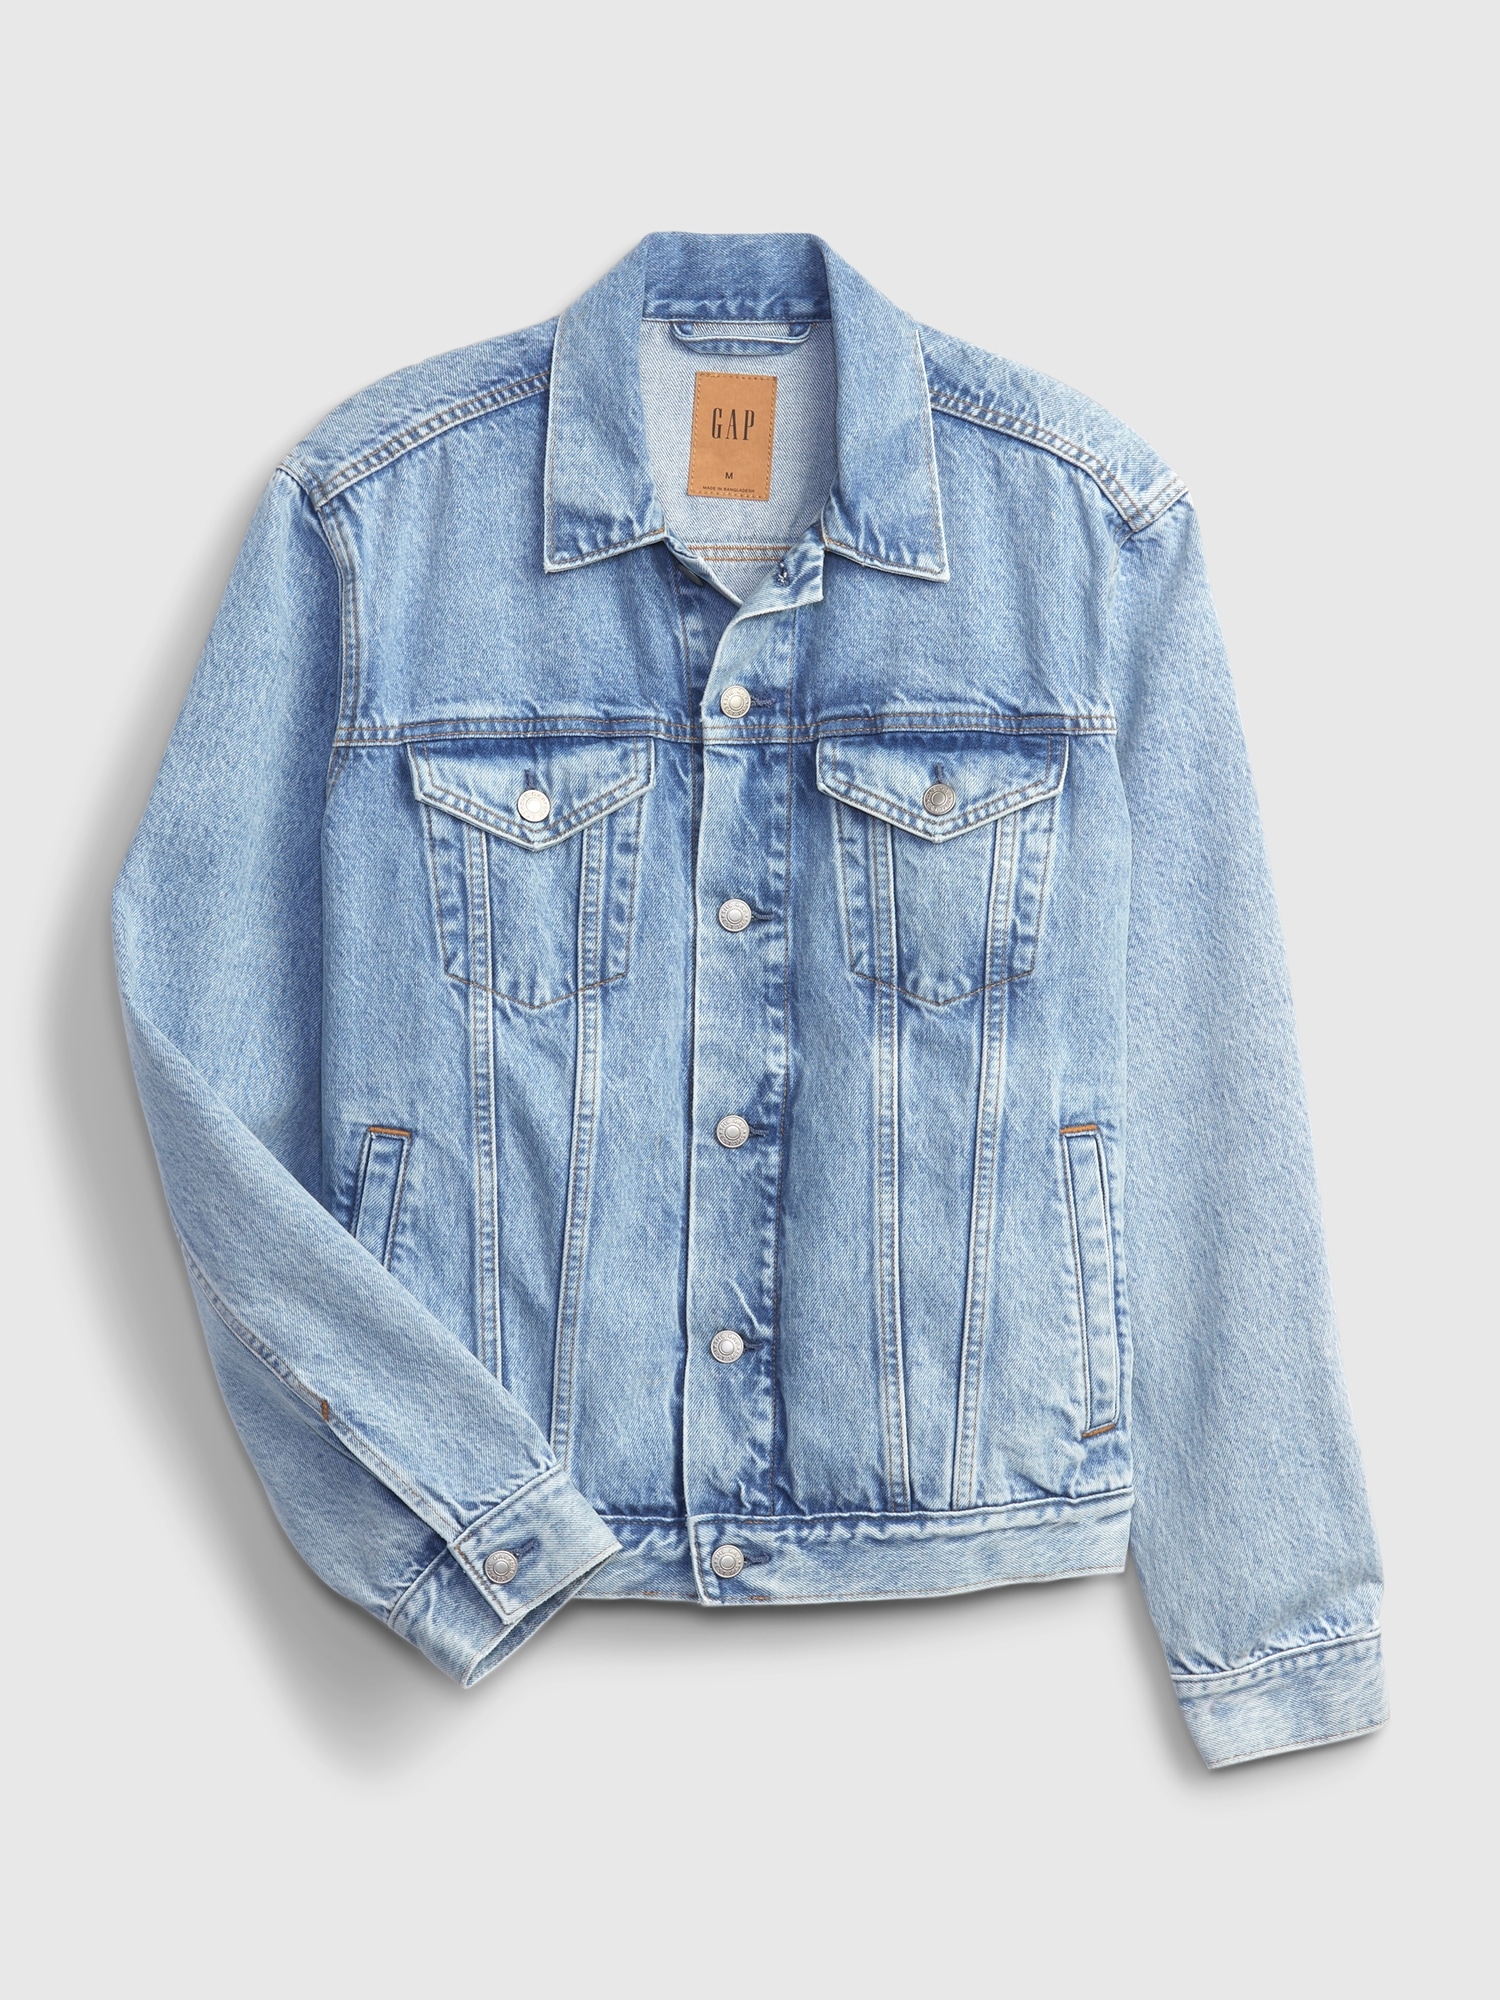 Stylish jeans jacket designs for girls | Outstanding denim jacket designs  for women | Blue jean jacket outfits, Jacket outfit women, Denim jacket  outfit